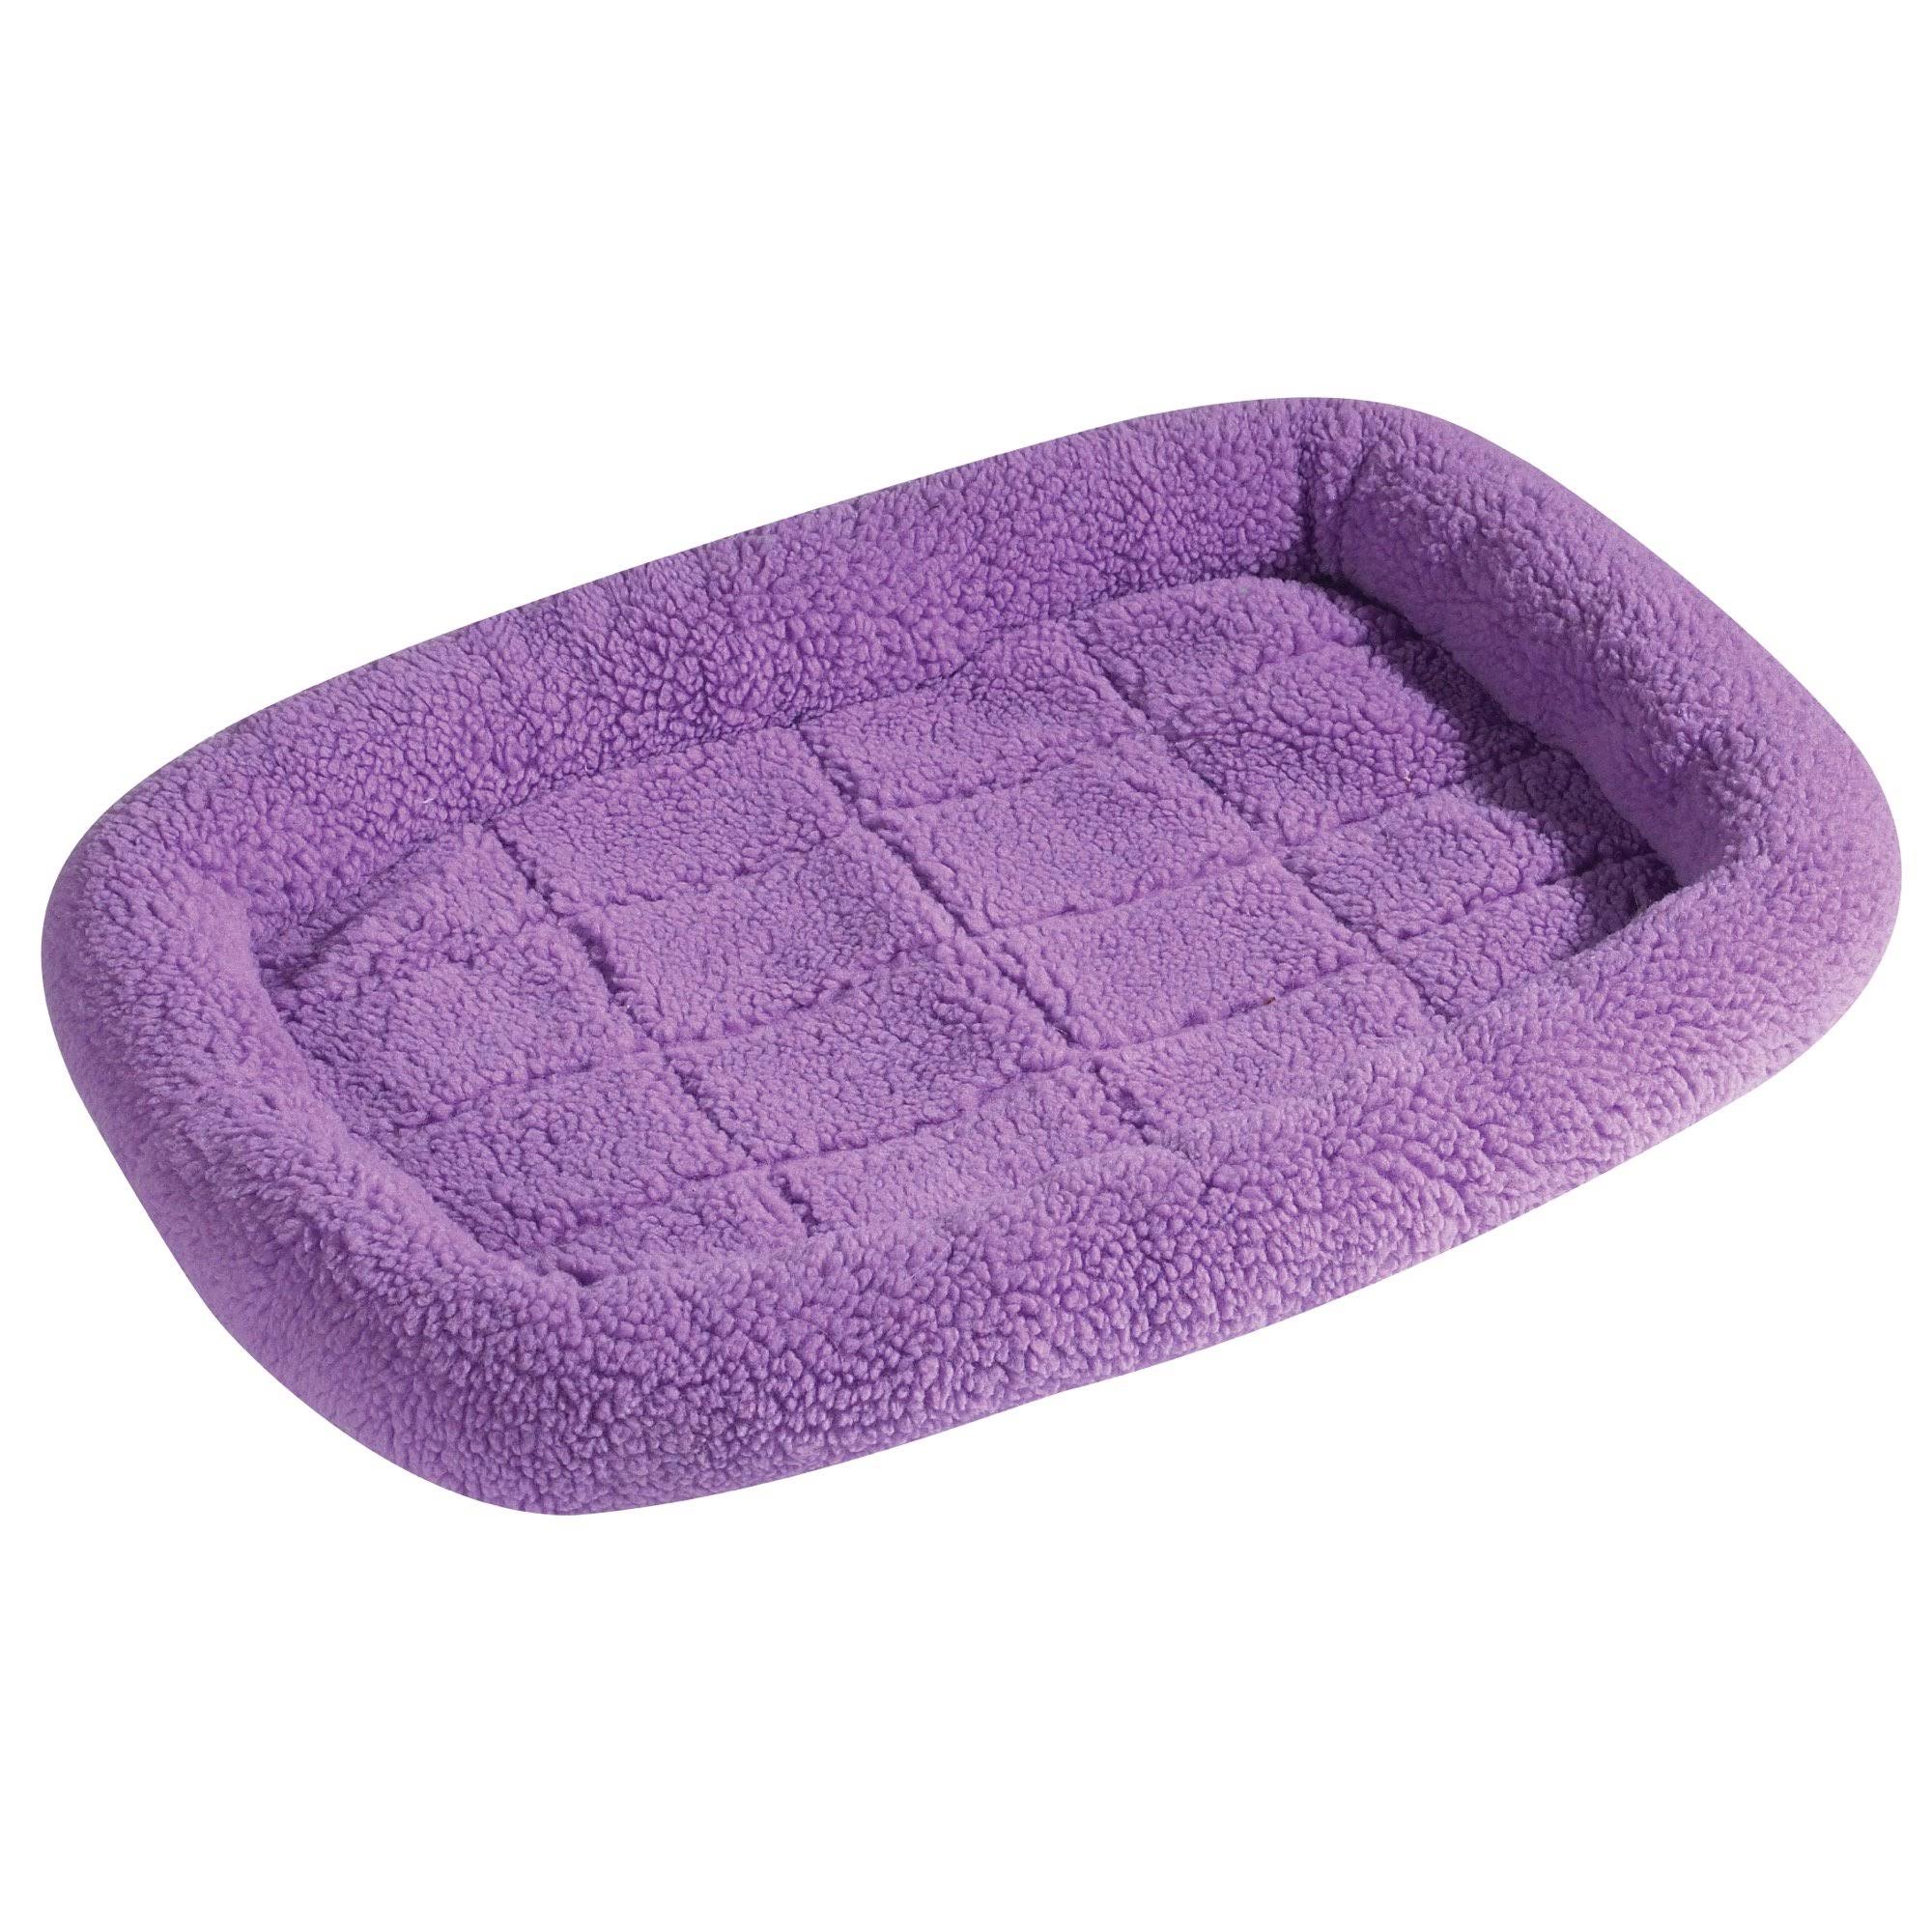 Slumber Pet Sherpa Crate Beds Comfortable BumperStyle Beds For Dogs and Cats